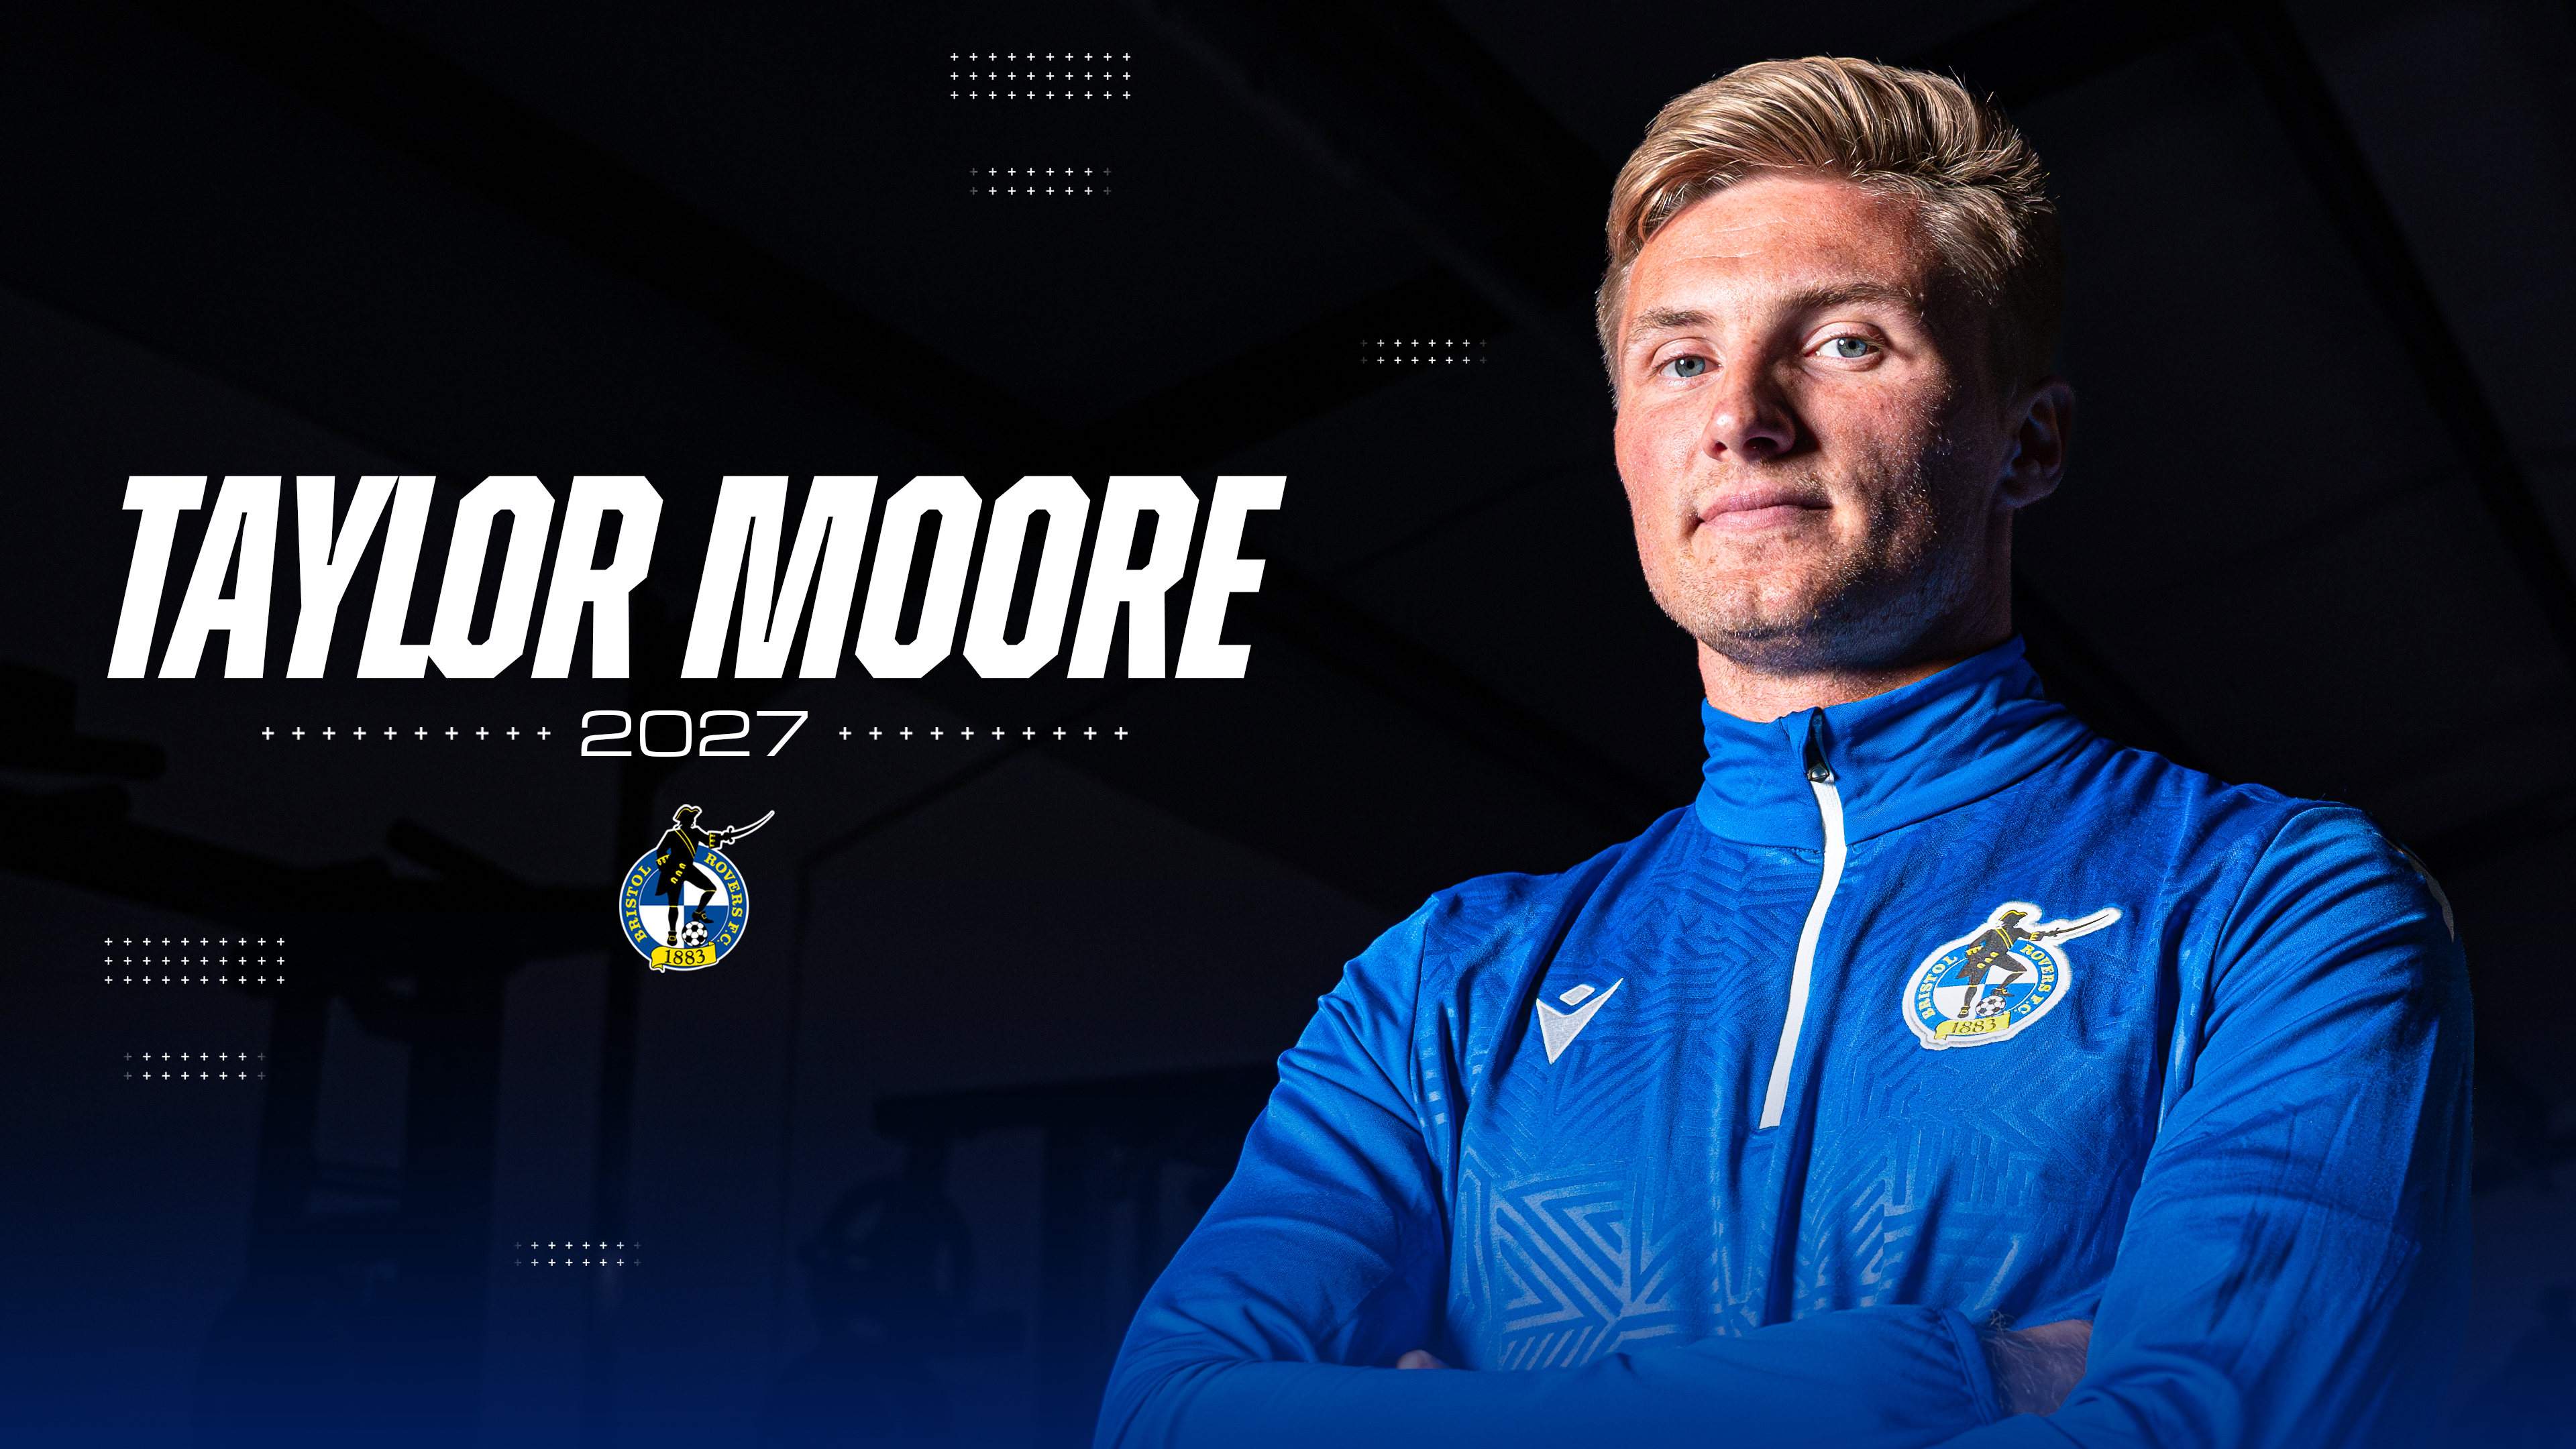 Taylor Moore signs for Bristol Rovers